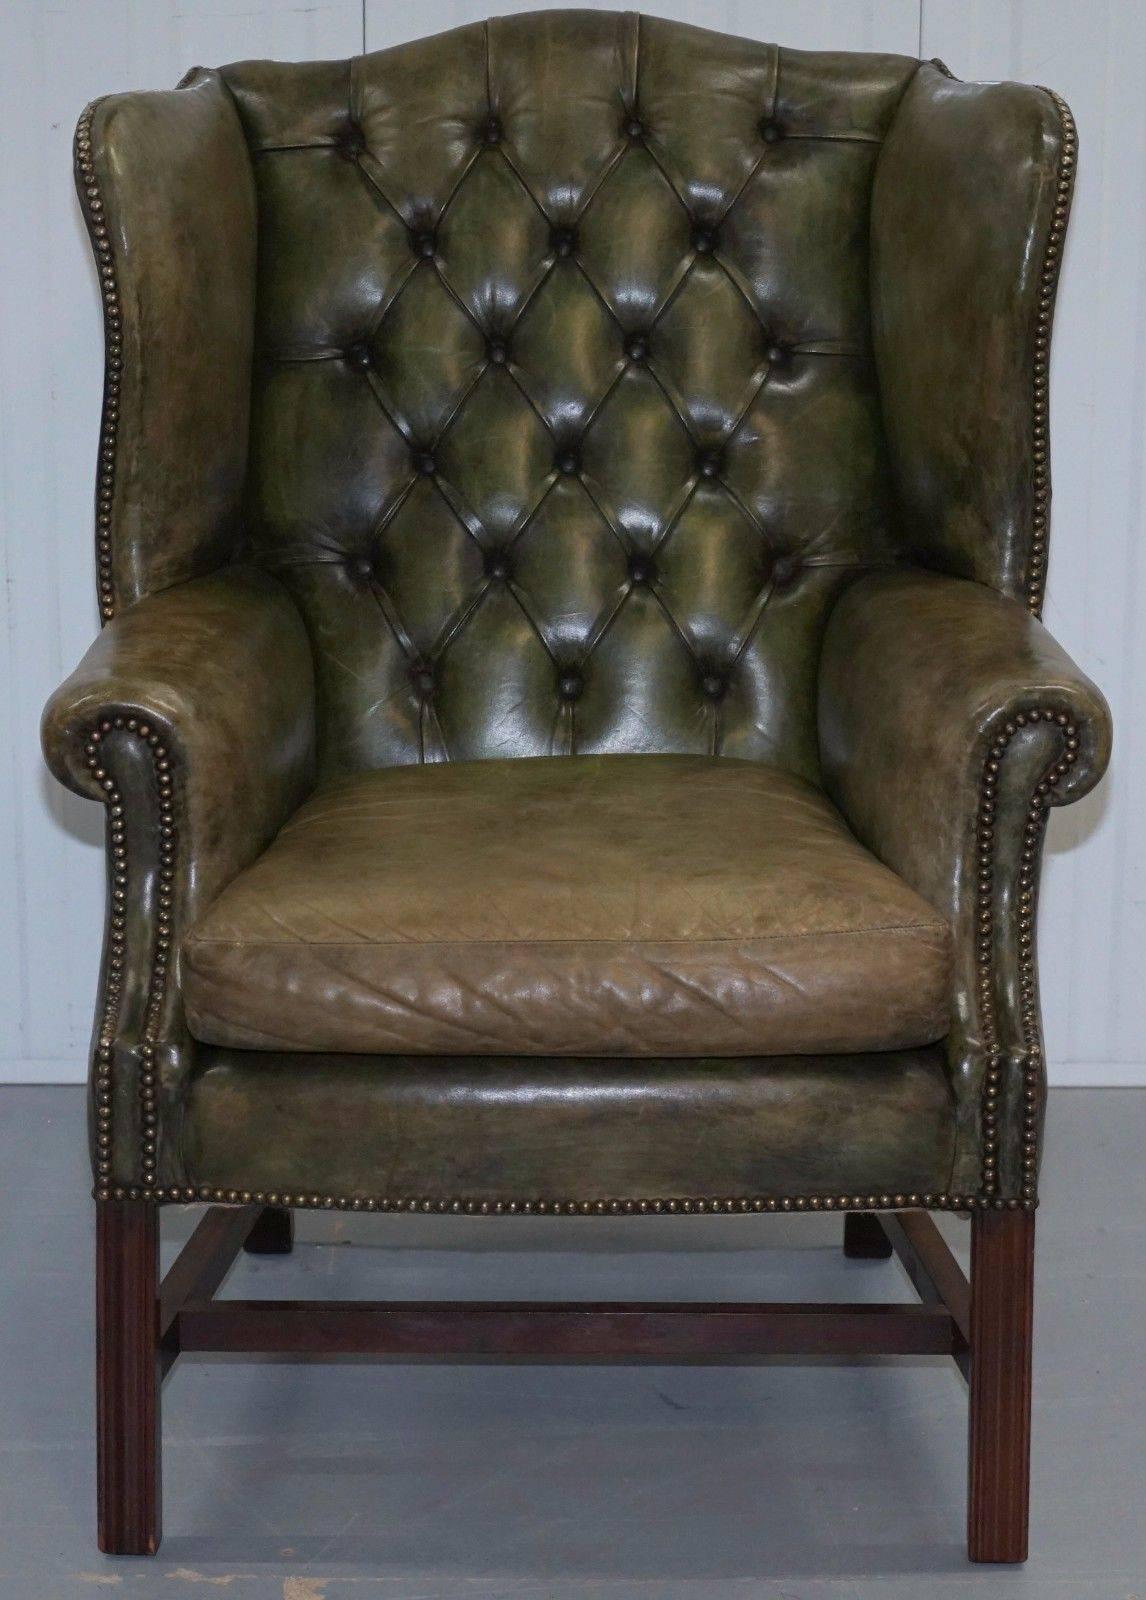 We are delighted to offer for sale this lovely original 1960s hand dyed green leather Chesterfield wingback armchair with George III straight H-frame legs

The condition is exactly what you should be looking for if you are in the market for an